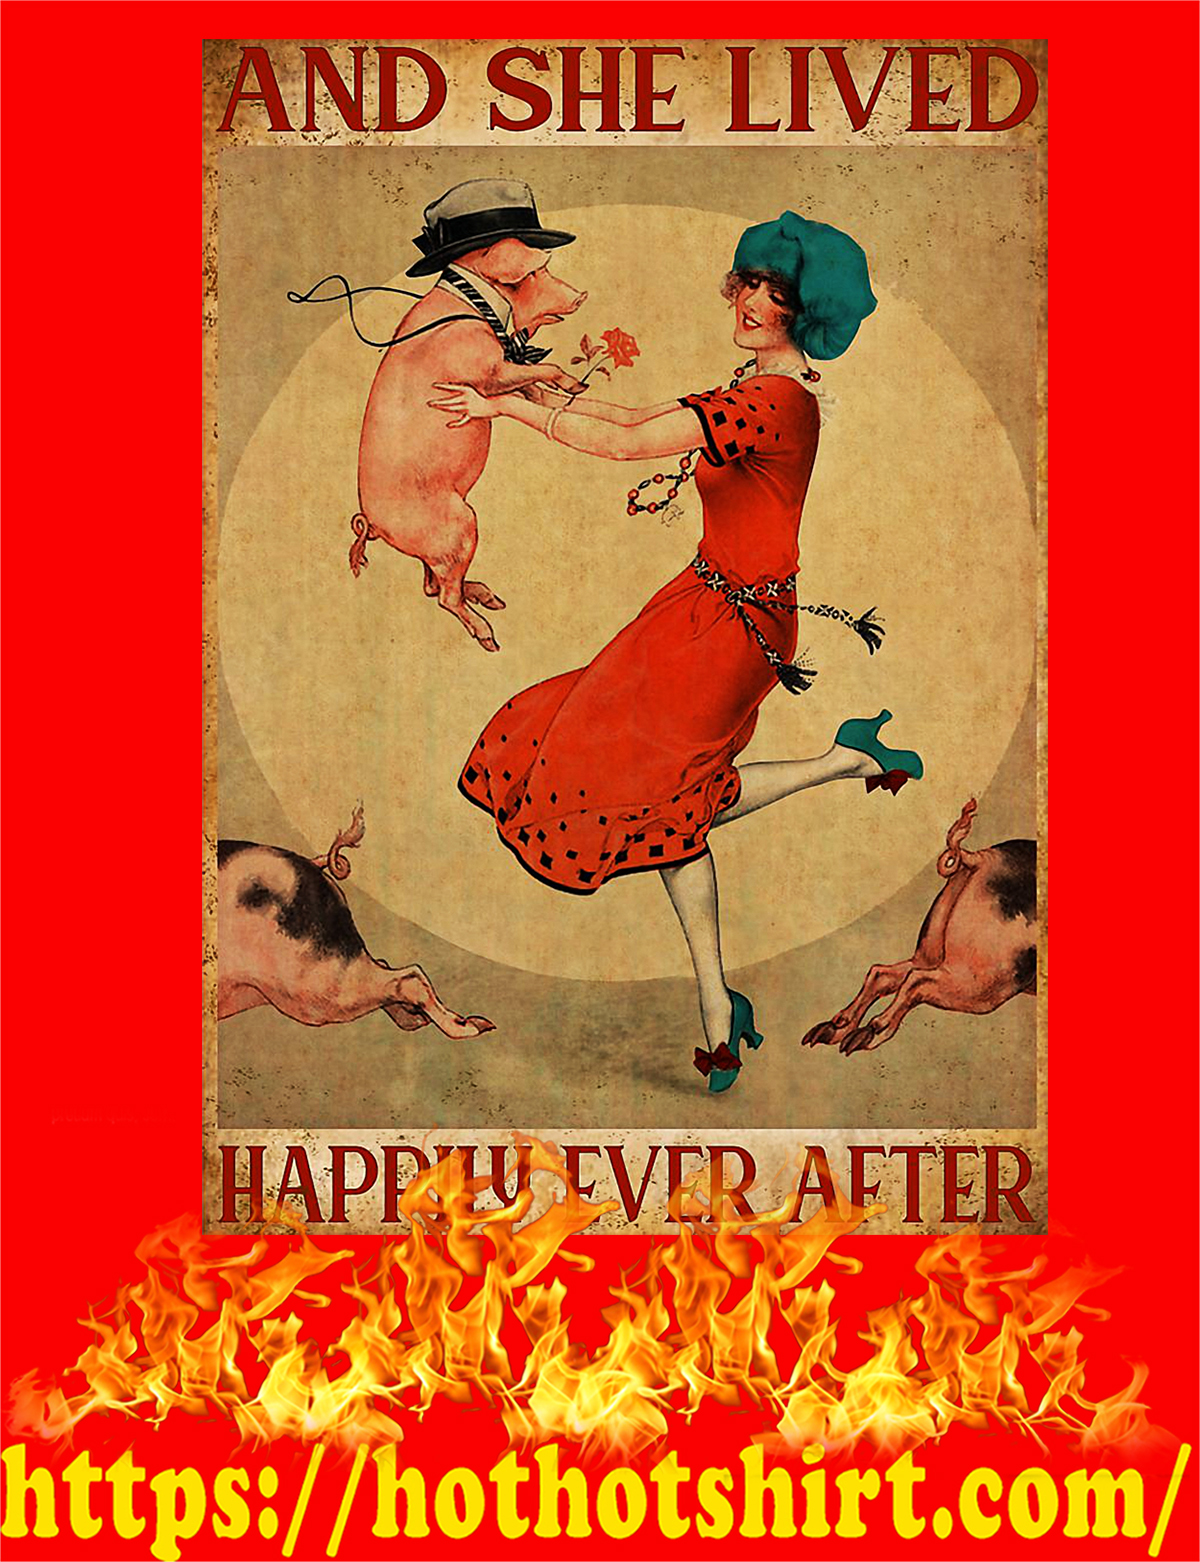 Pig And she lived happily ever after poster